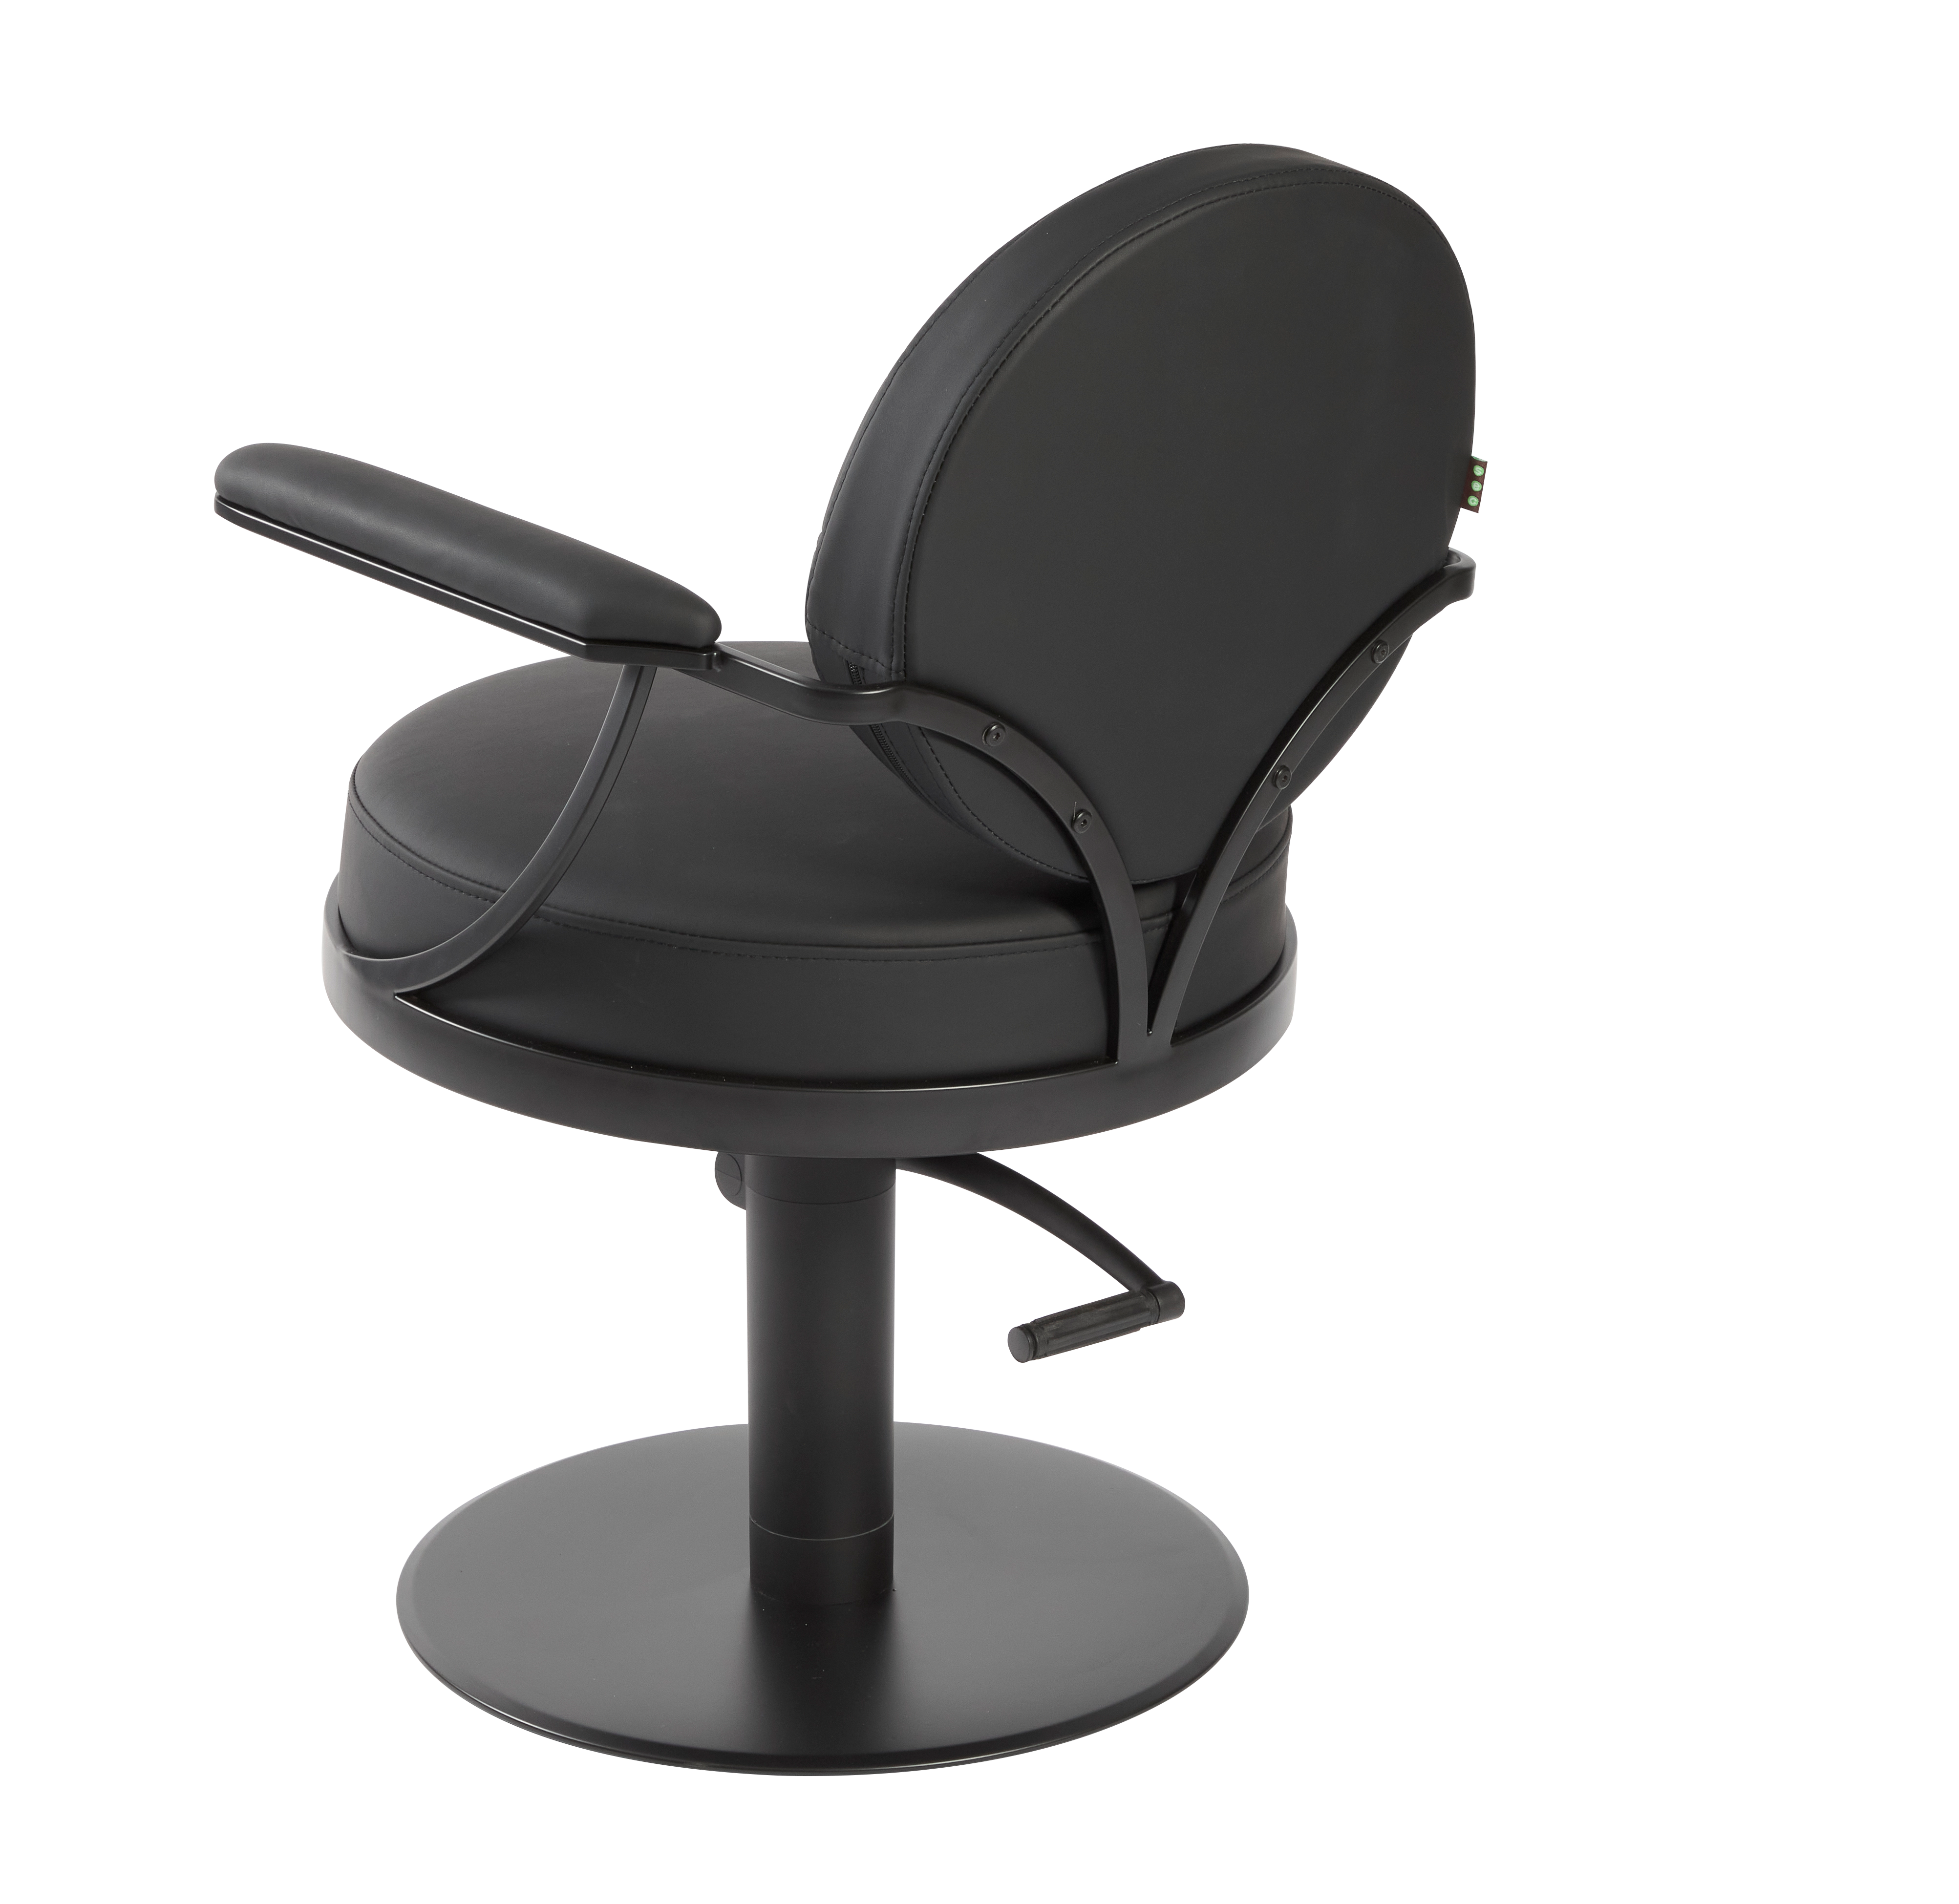 The Tulip Salon Styling Chair - Matte Black by SEC